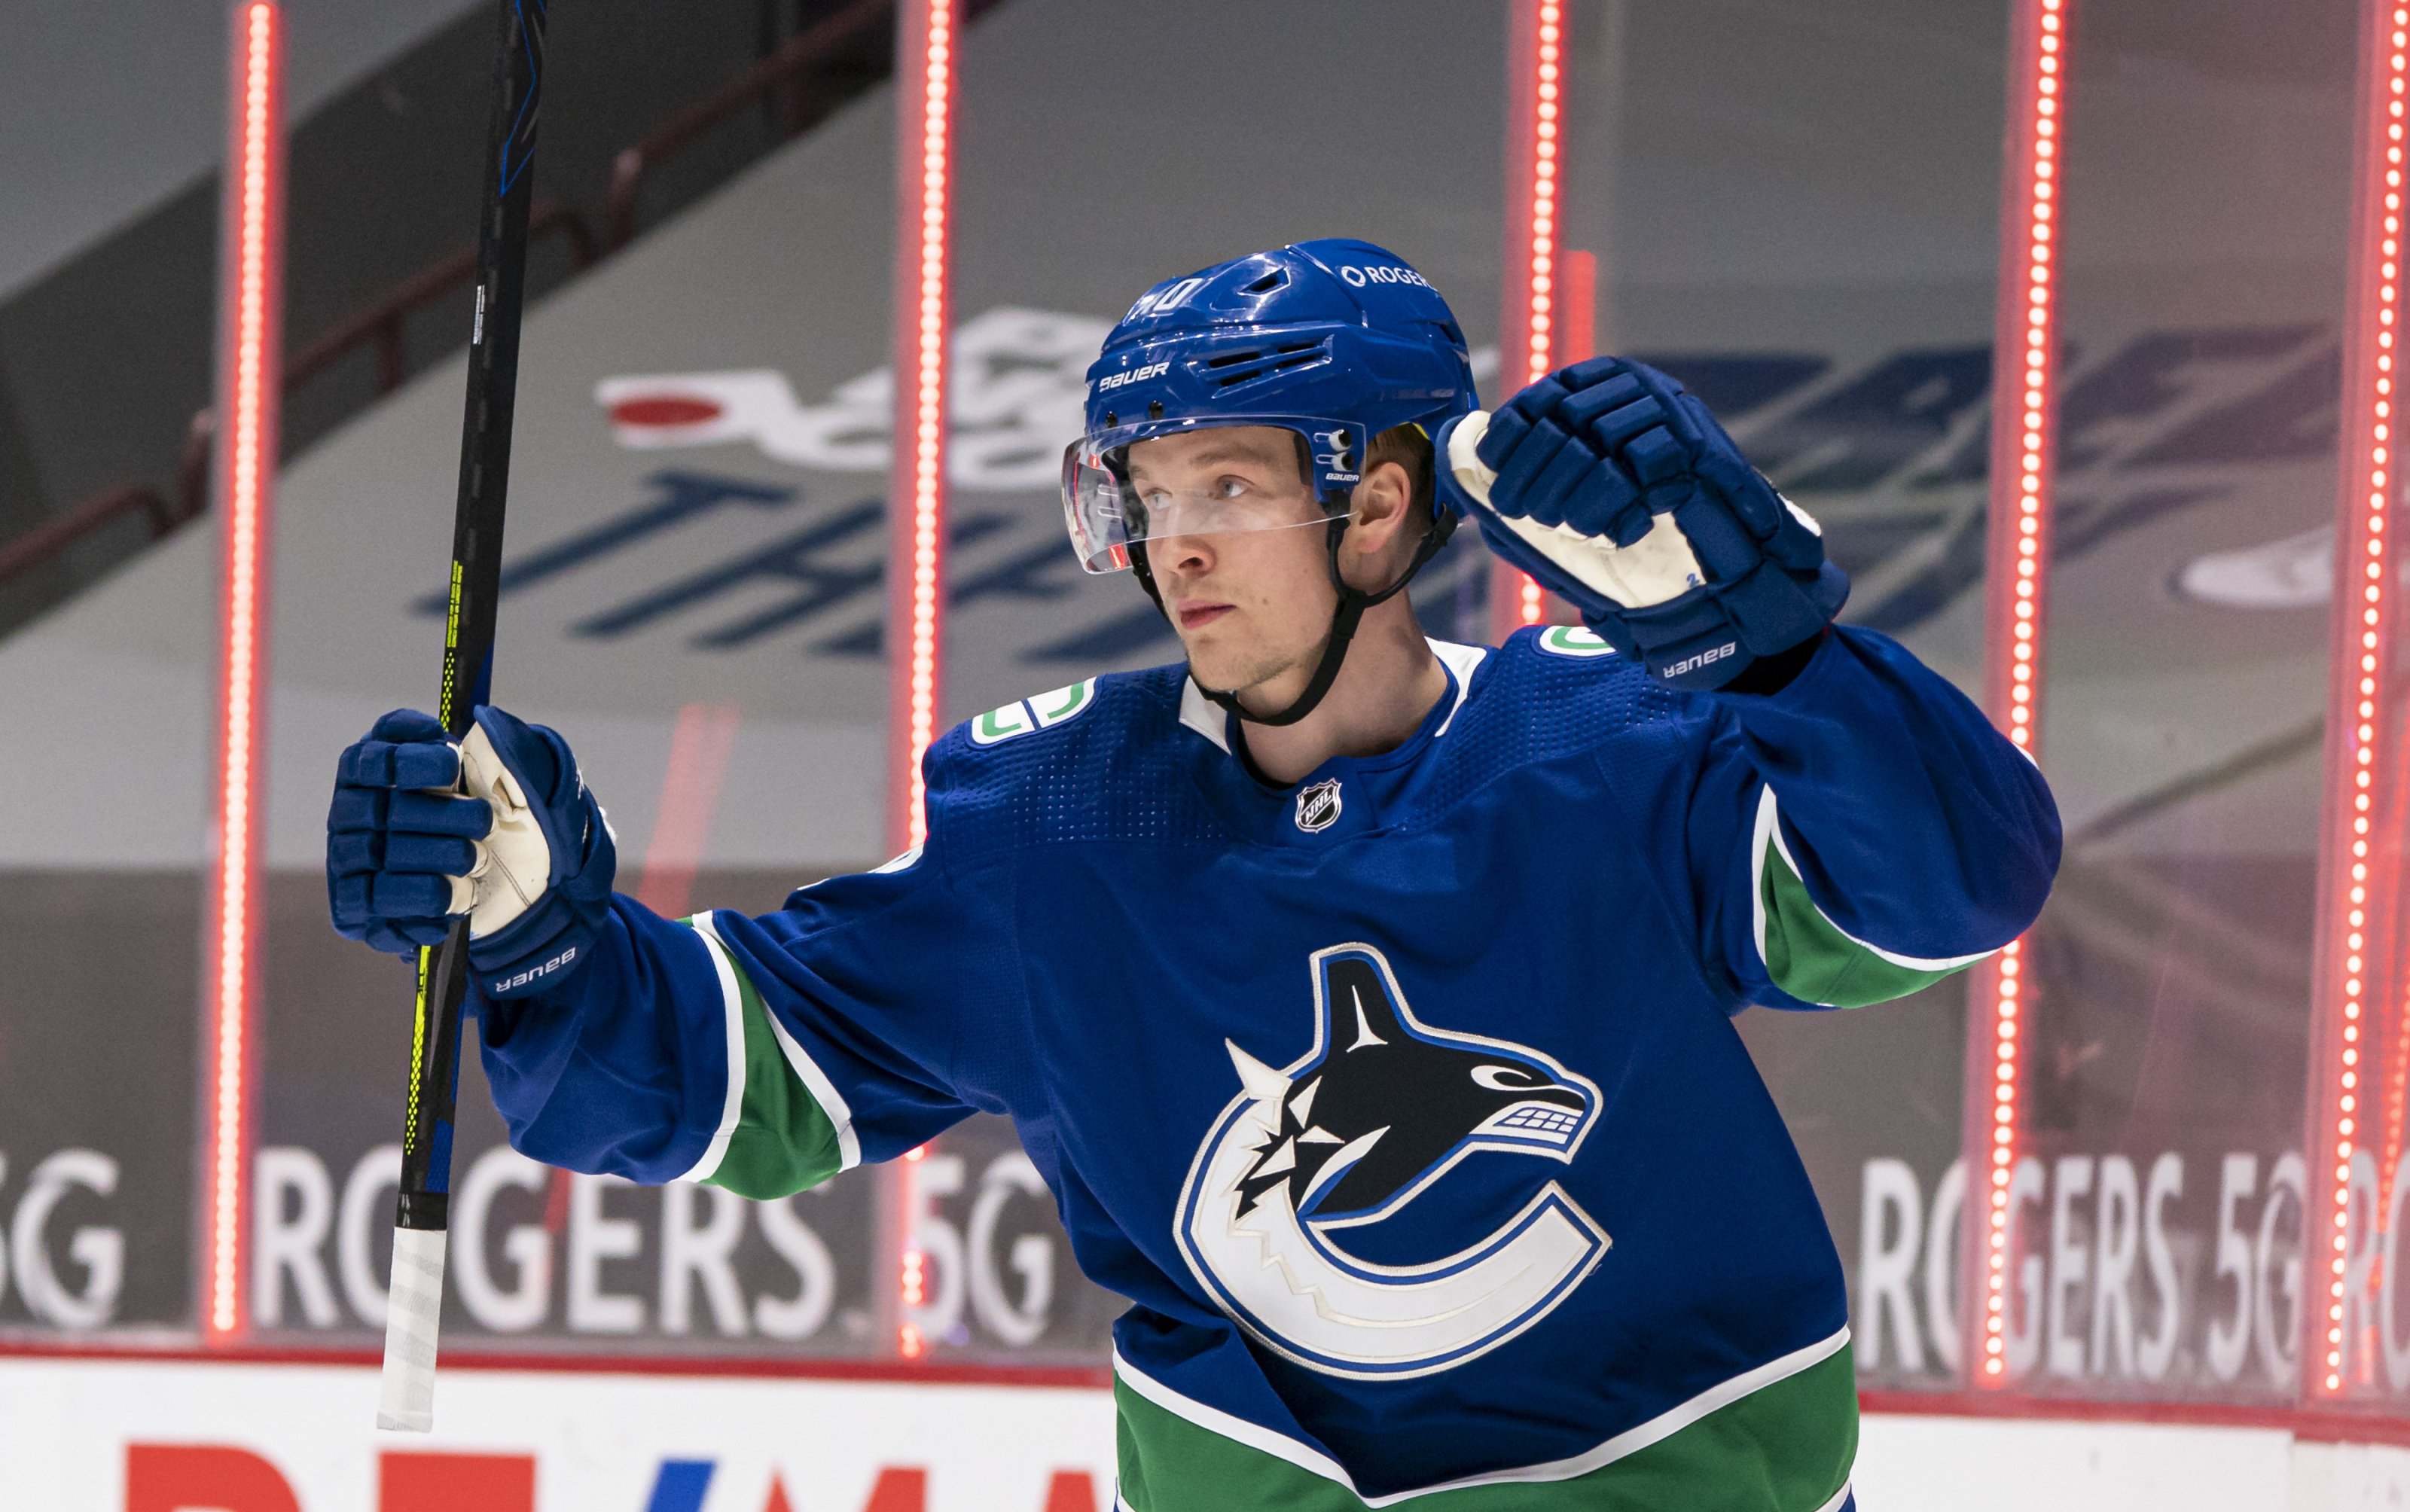 Vancouver Canucks sign Elias Pettersson - The 2022 Draft pick